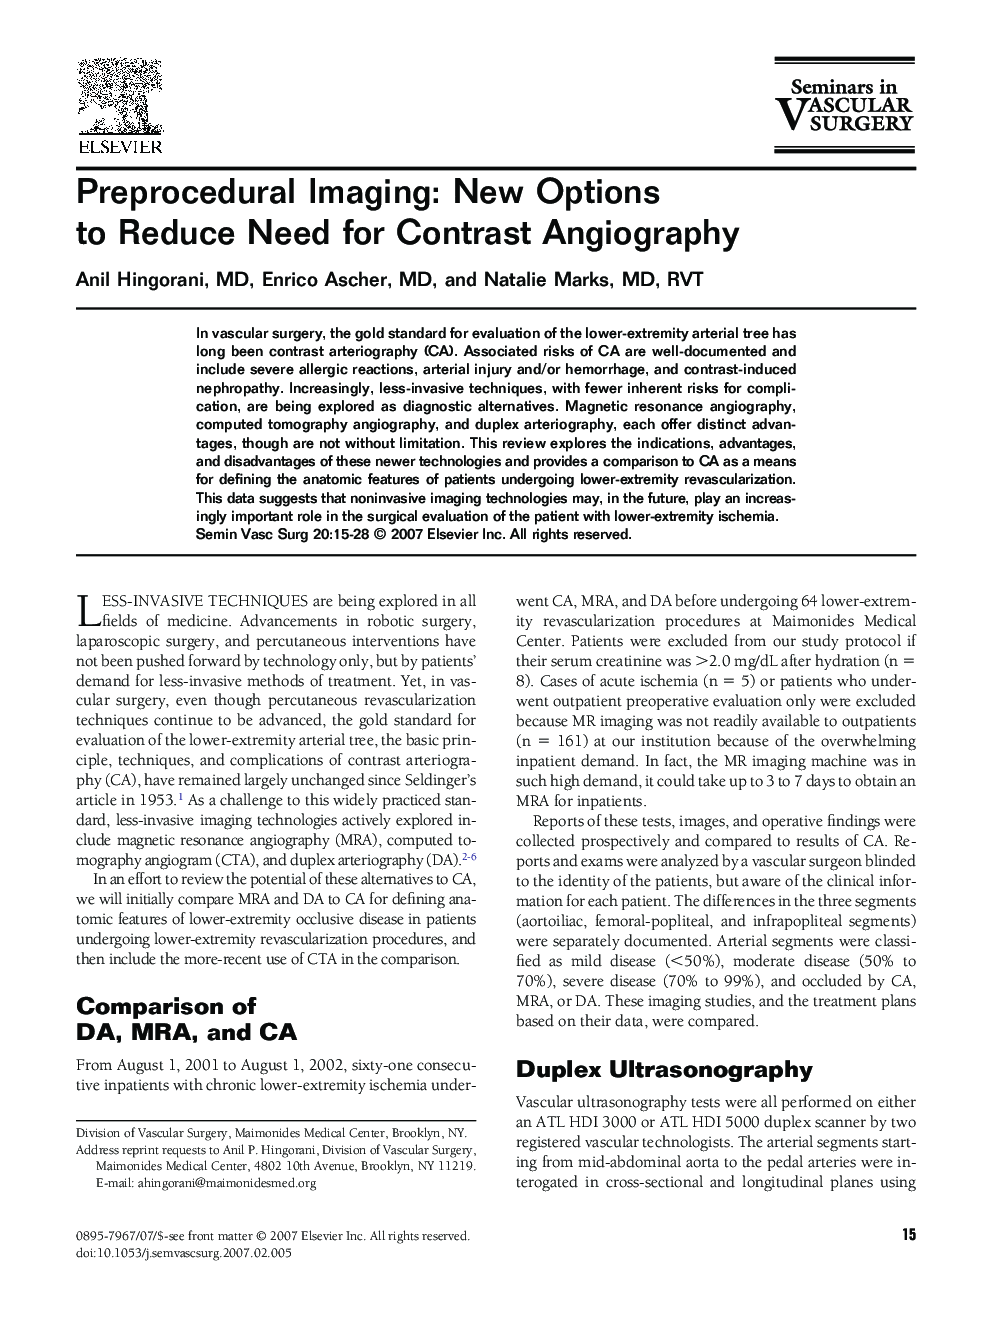 Preprocedural Imaging: New Options to Reduce Need for Contrast Angiography